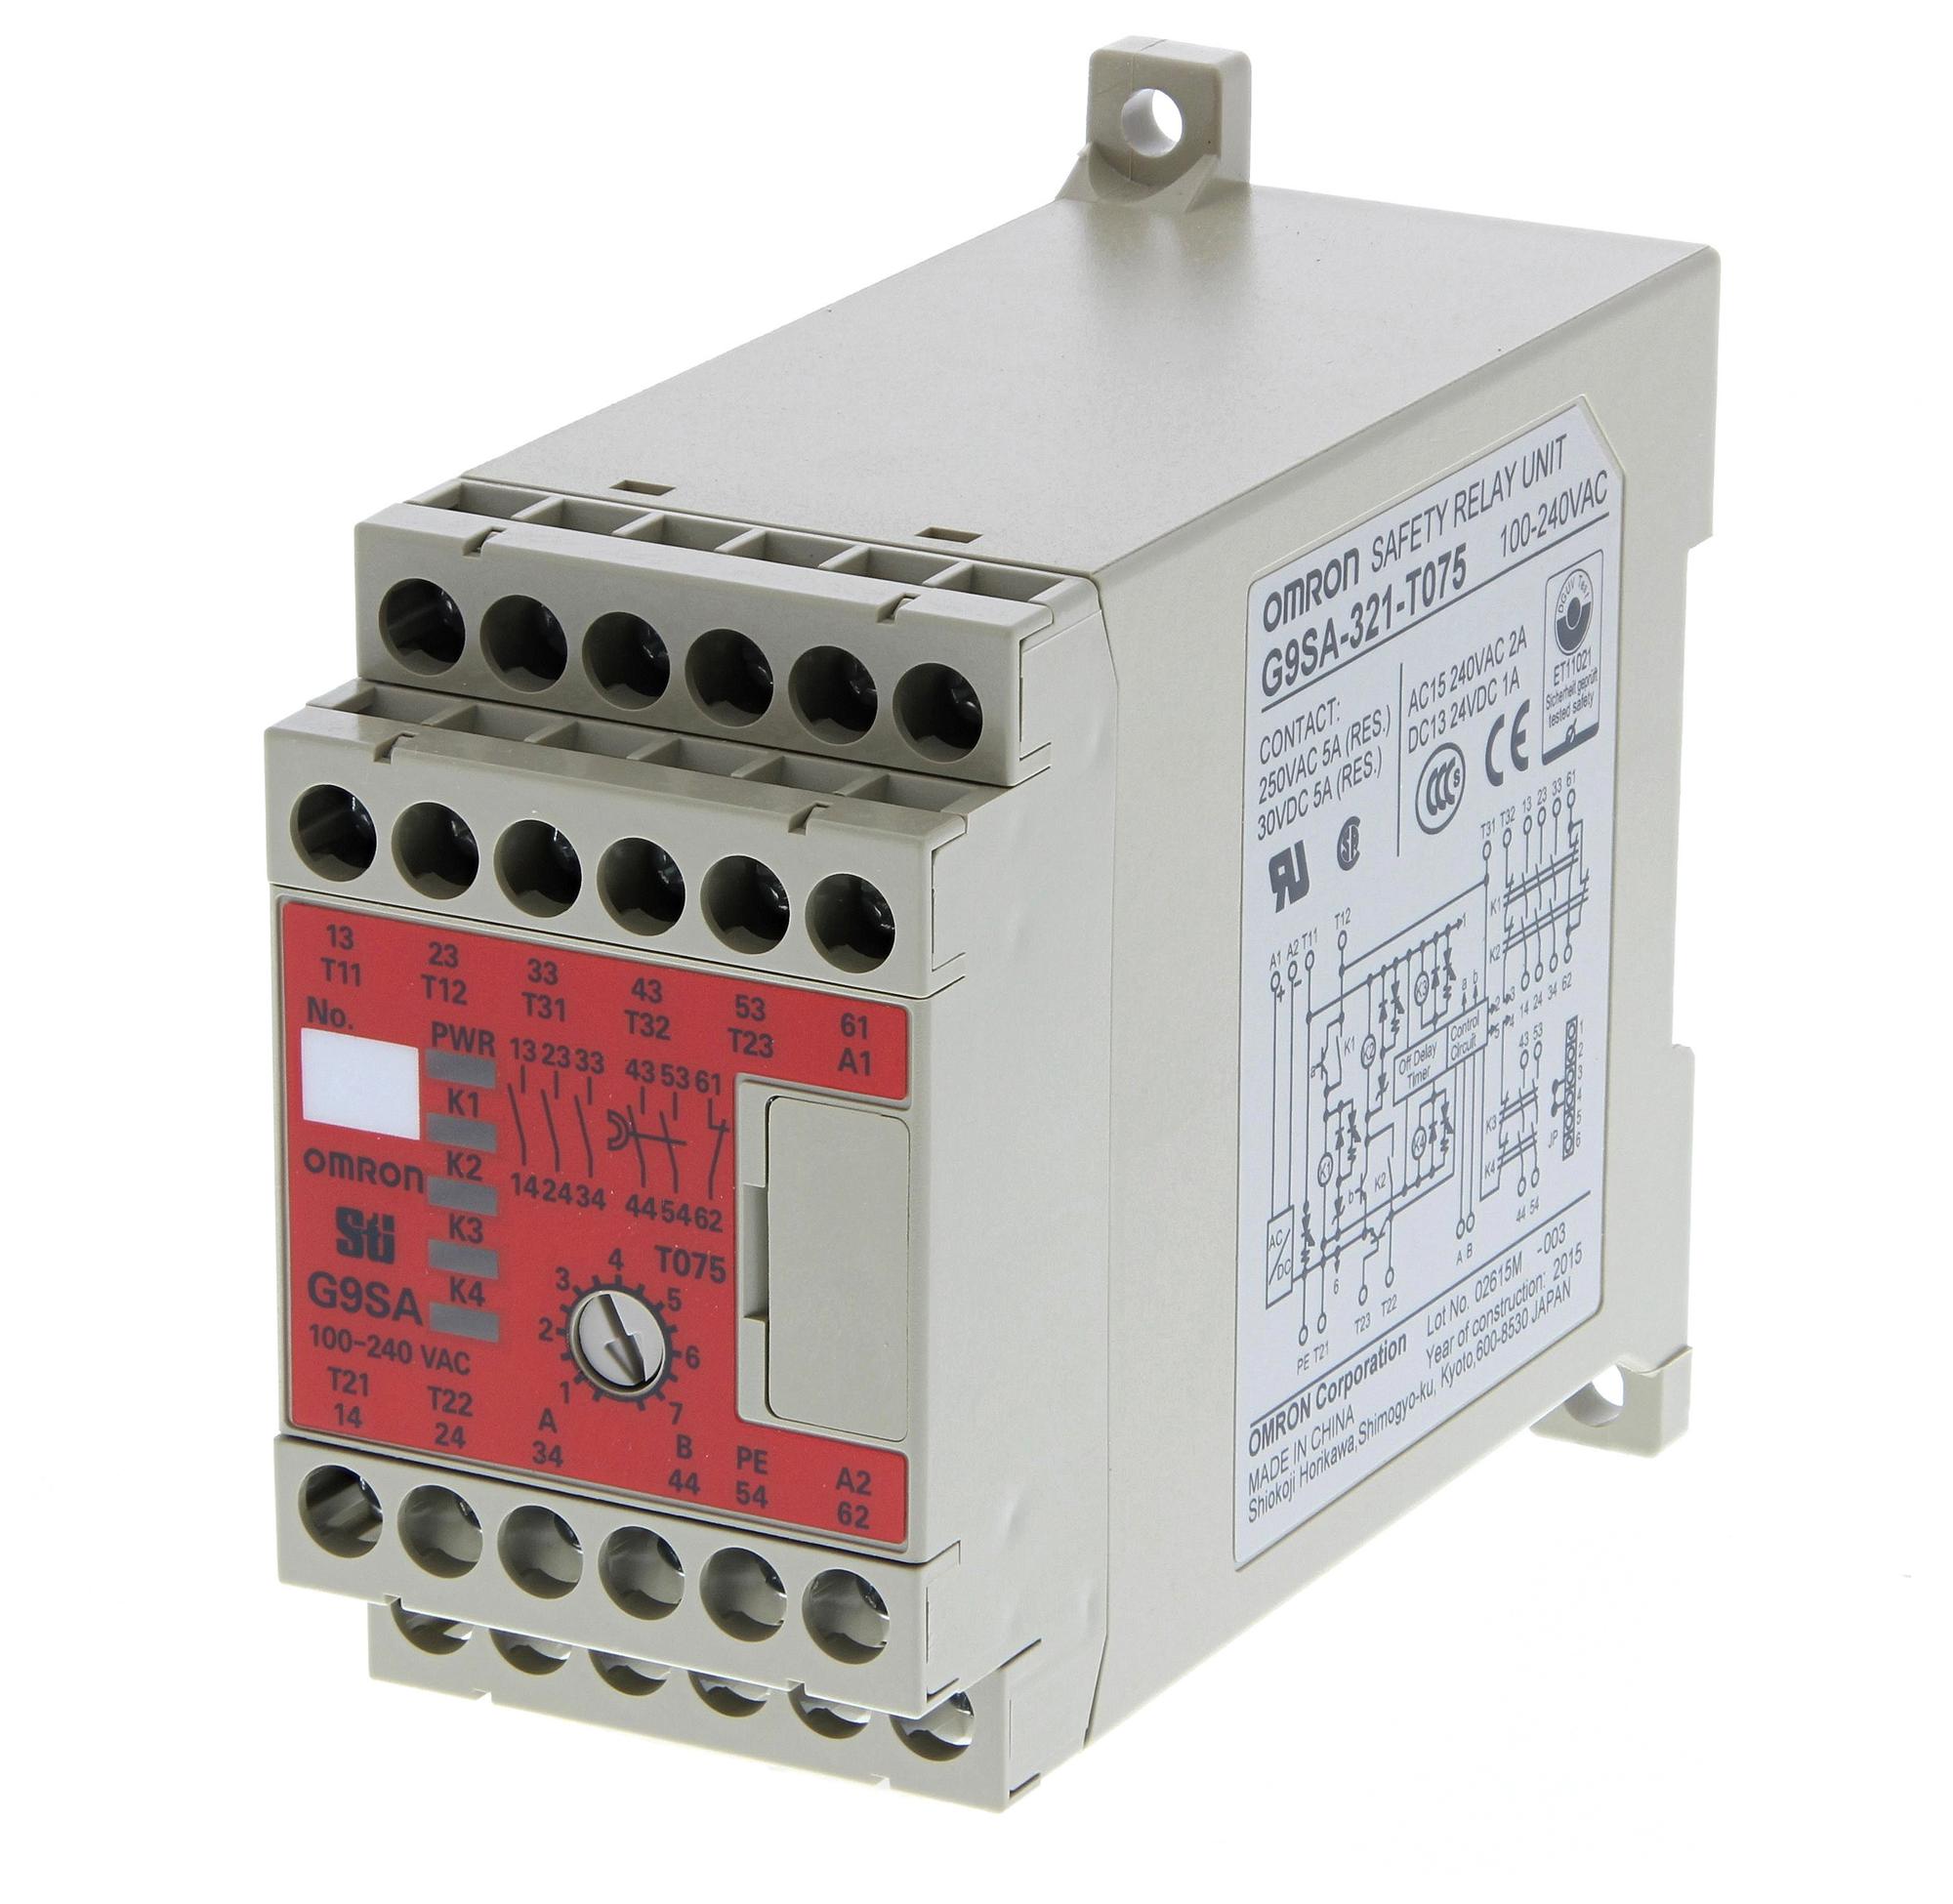 G9SA-321-T075 AC/DC24 SAFETY RELAYS OMRON